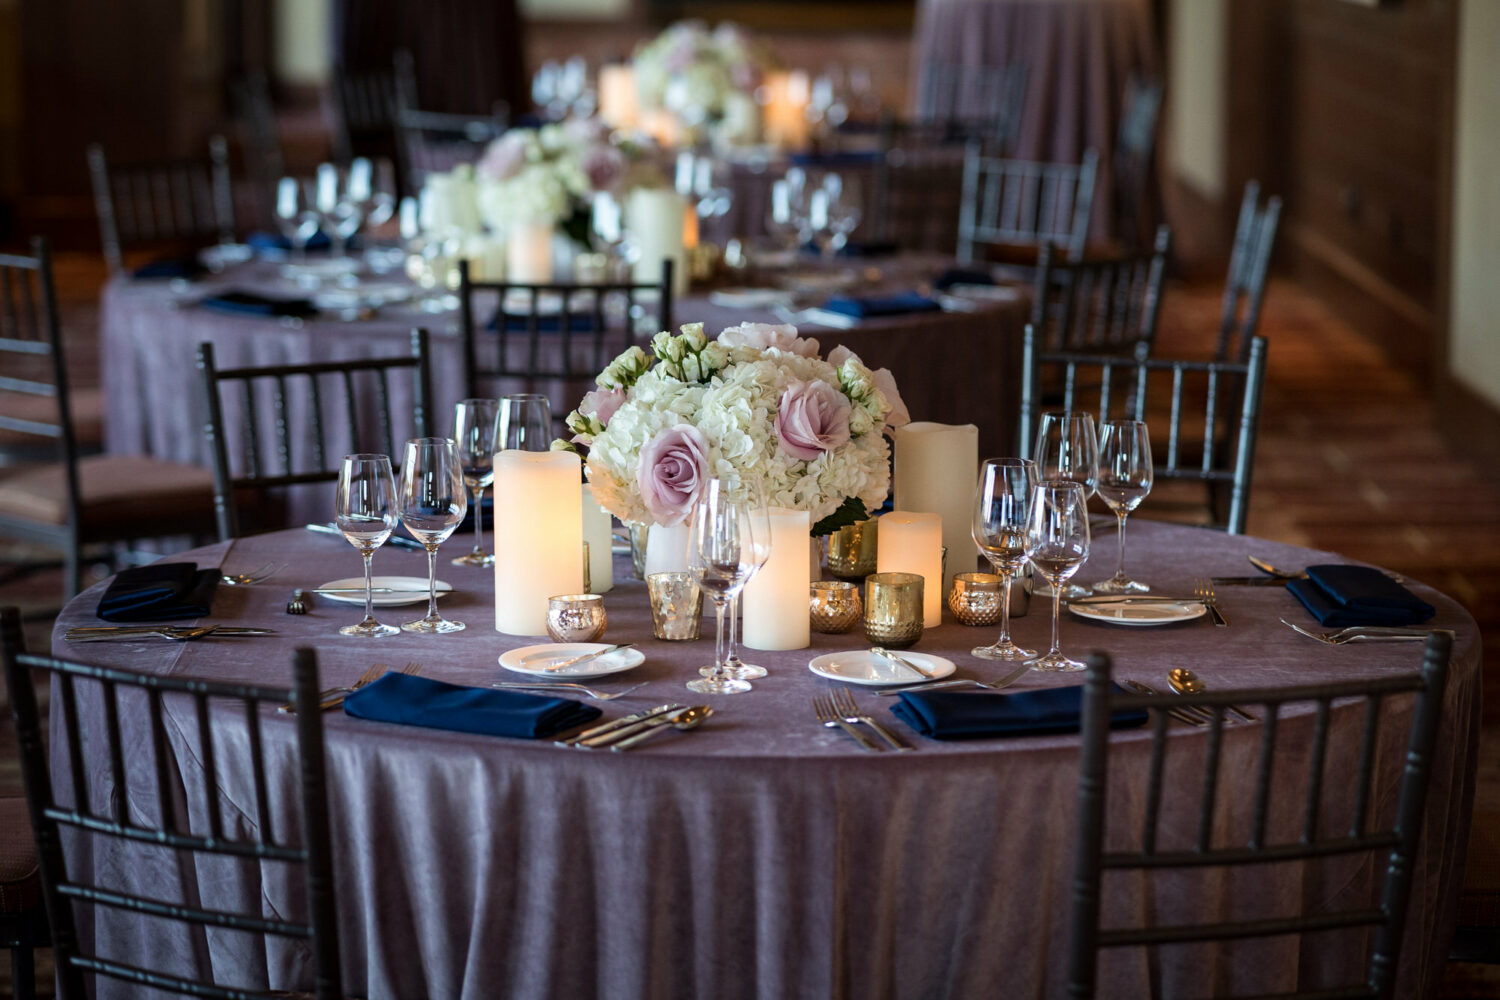 Round table setup for wedding reception with purple tablecloth and blue napkins. 